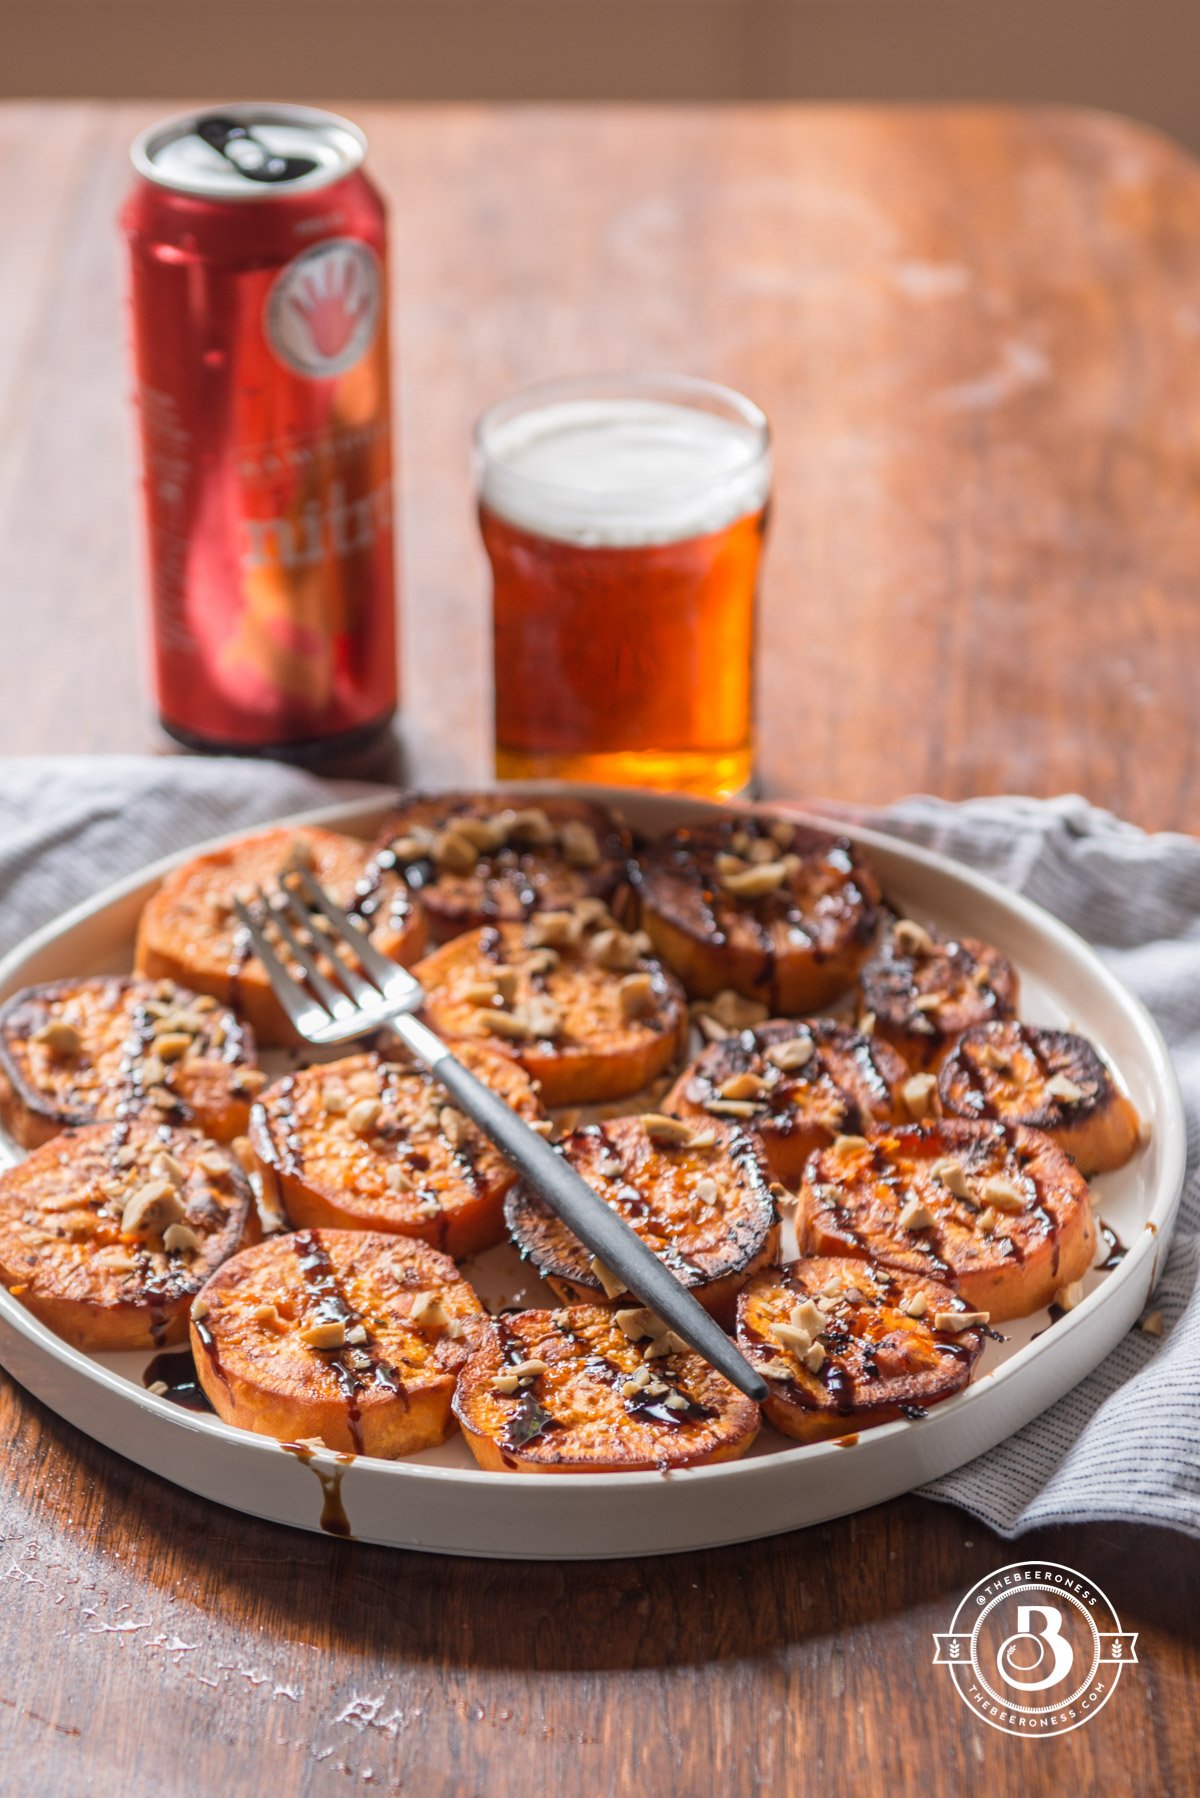 Melting Beer Sweet Potatoes with Balsamic and Hazelnuts